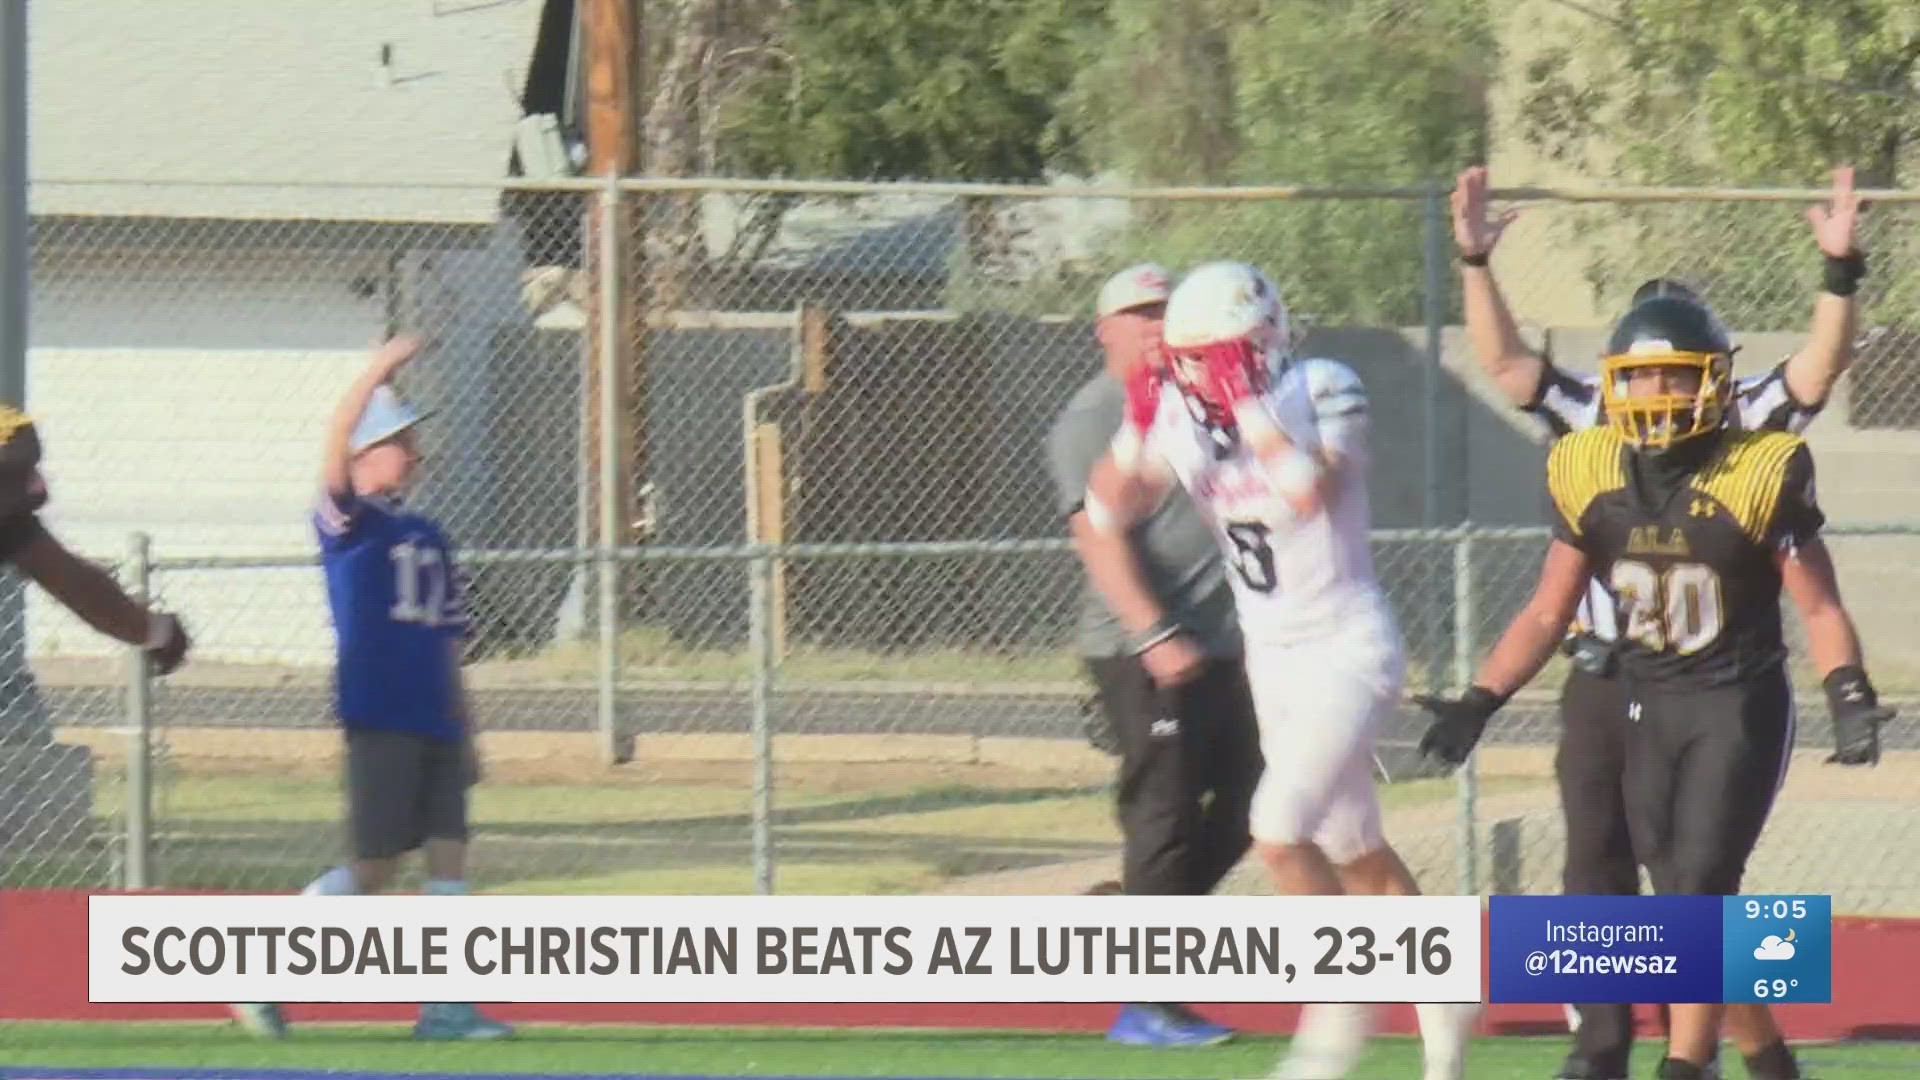 Scottsdale Christian is headed to the 2A state championship game after beating #2 Arizona Lutheran, 23-16, in the semifinals